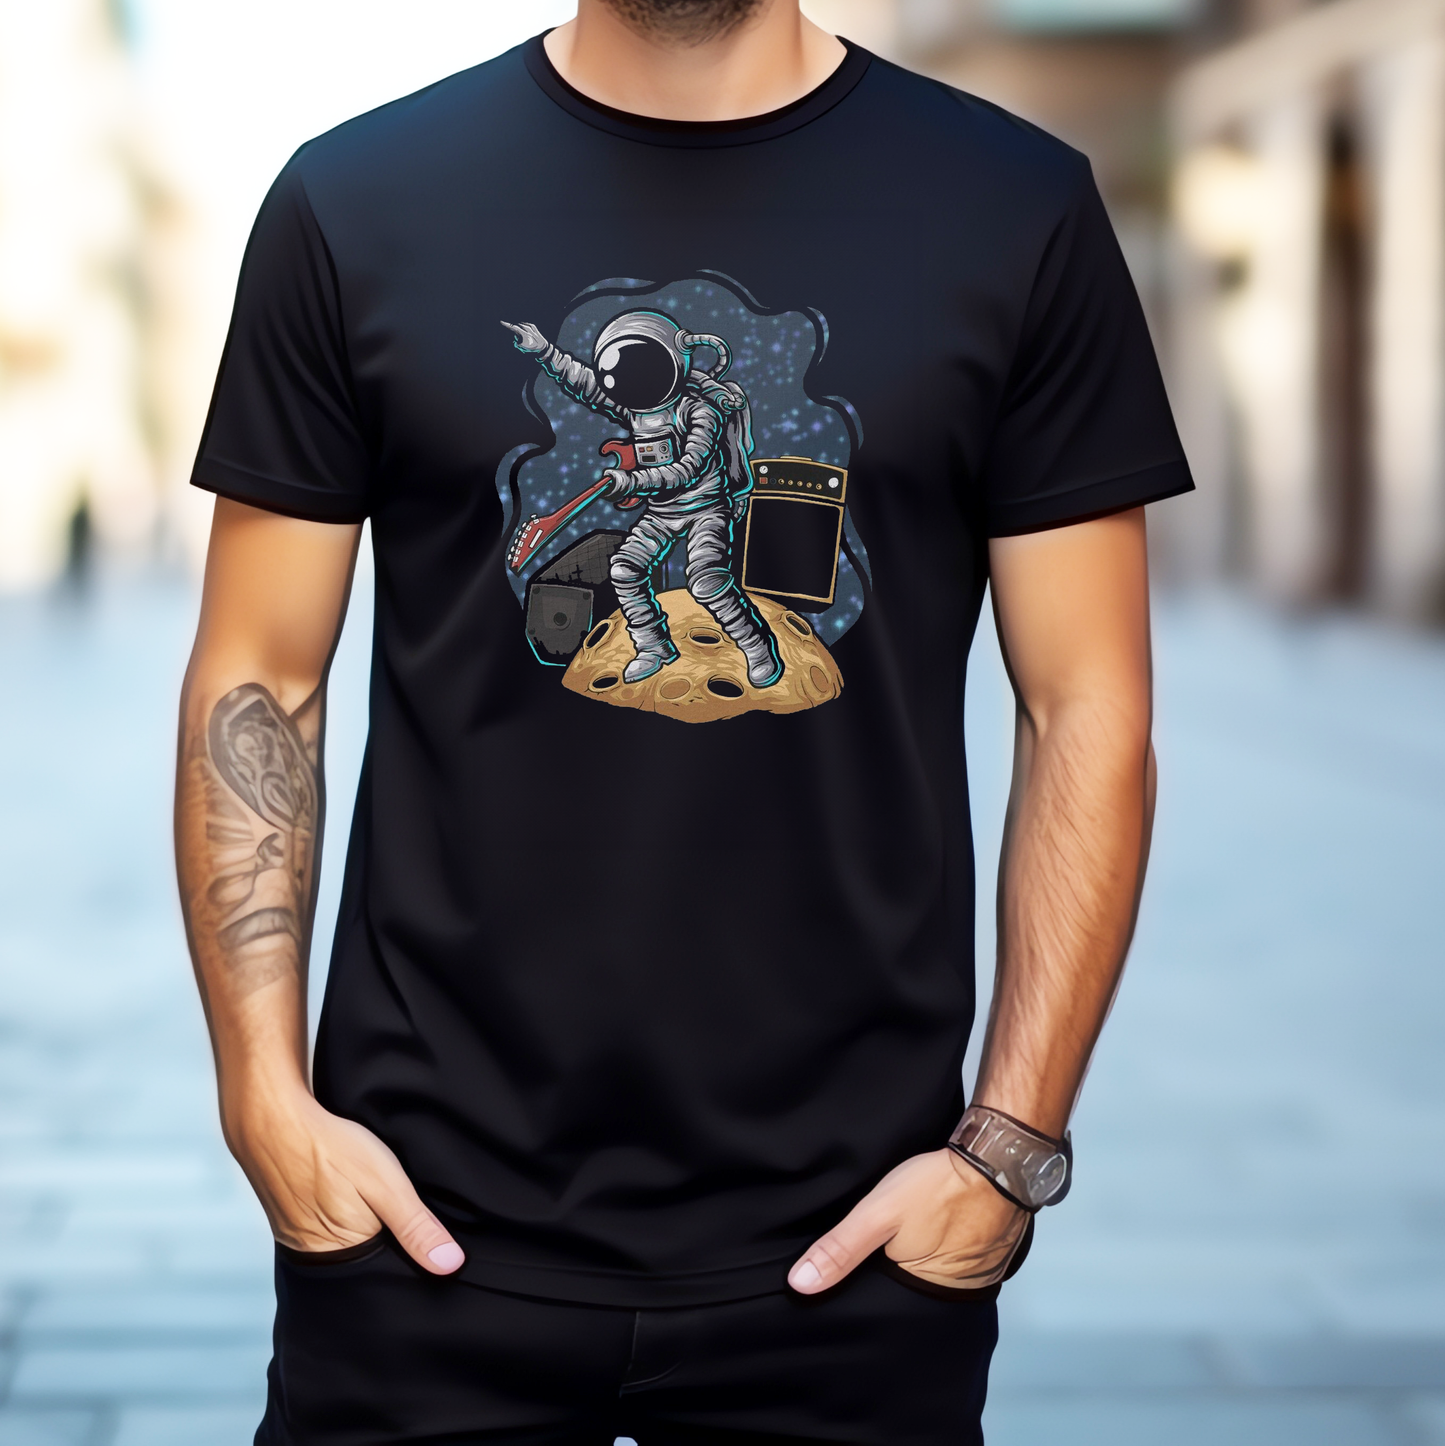 Astronaut Guitarist Space T-Shirt - Cosmic Style with Musical Flair, Unisex.